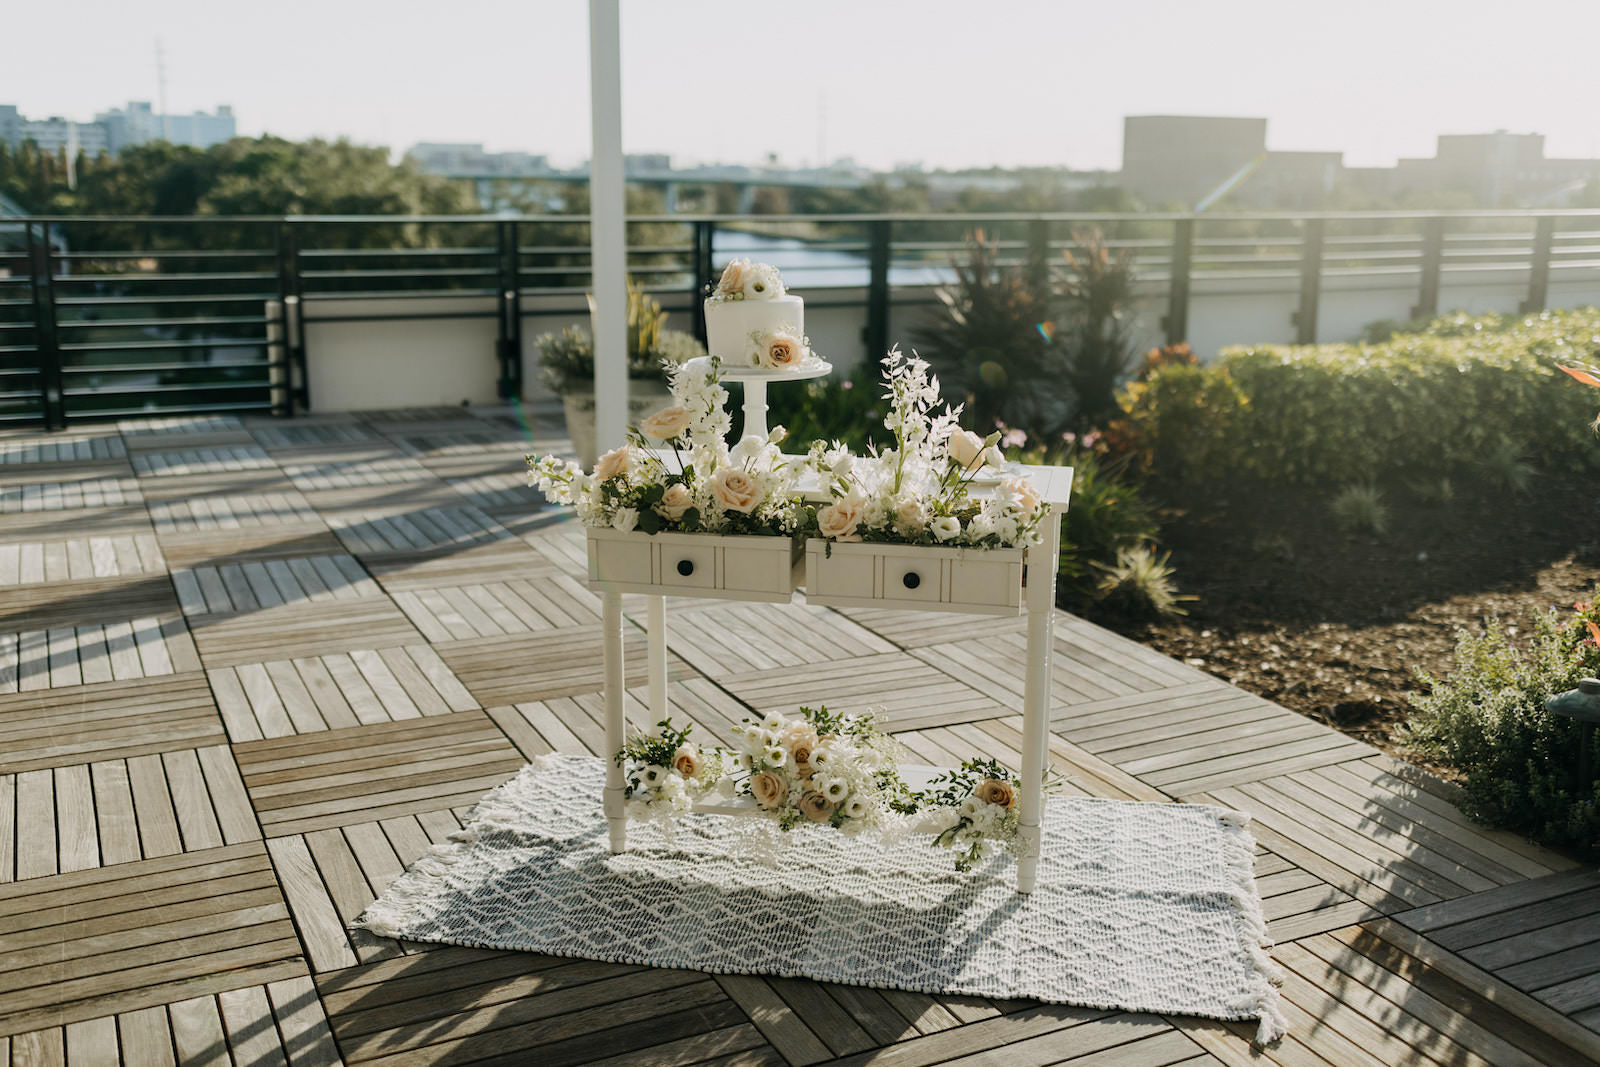 Neutral Modern Wedding Decor, White Dresser with White Floral Bouquets and Small One Tier Wedding Cake | Wedding Planner Elope Tampa Bay | Wedding Photographer Amber McWhorter | Wedding Venue Rooftop 220